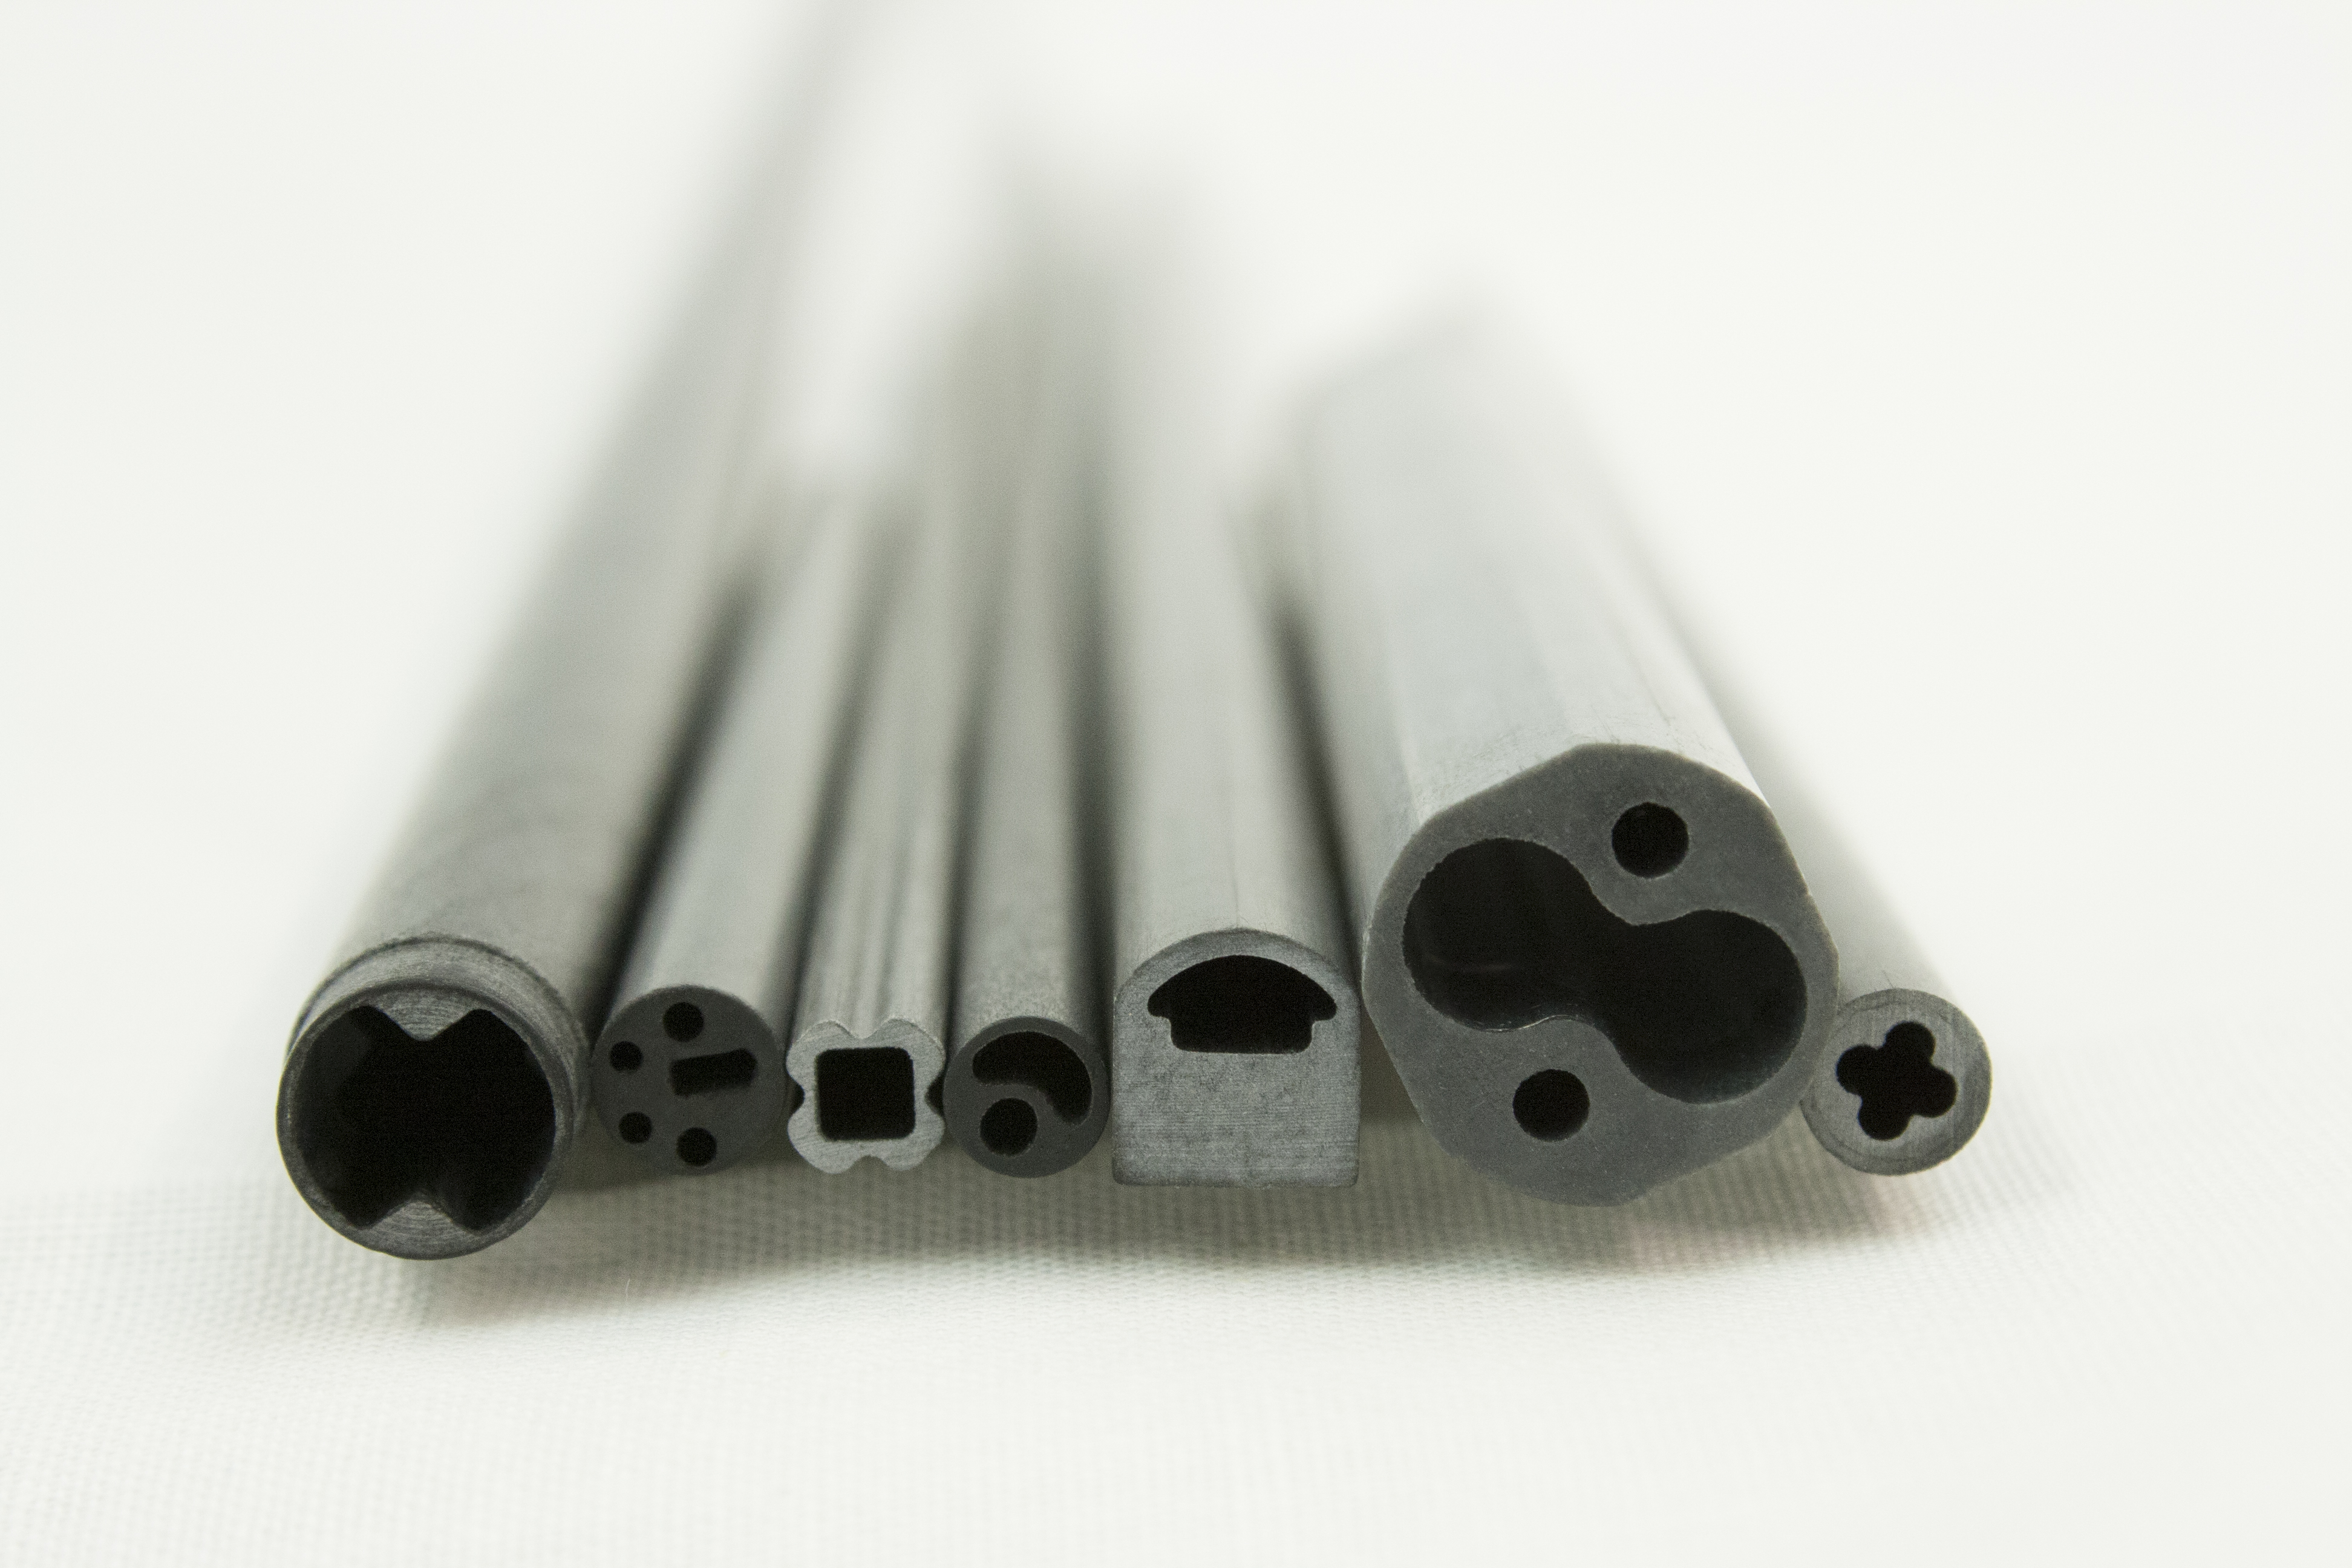 According to the company, its composite tubing is suitable for use in a range of medical applications.